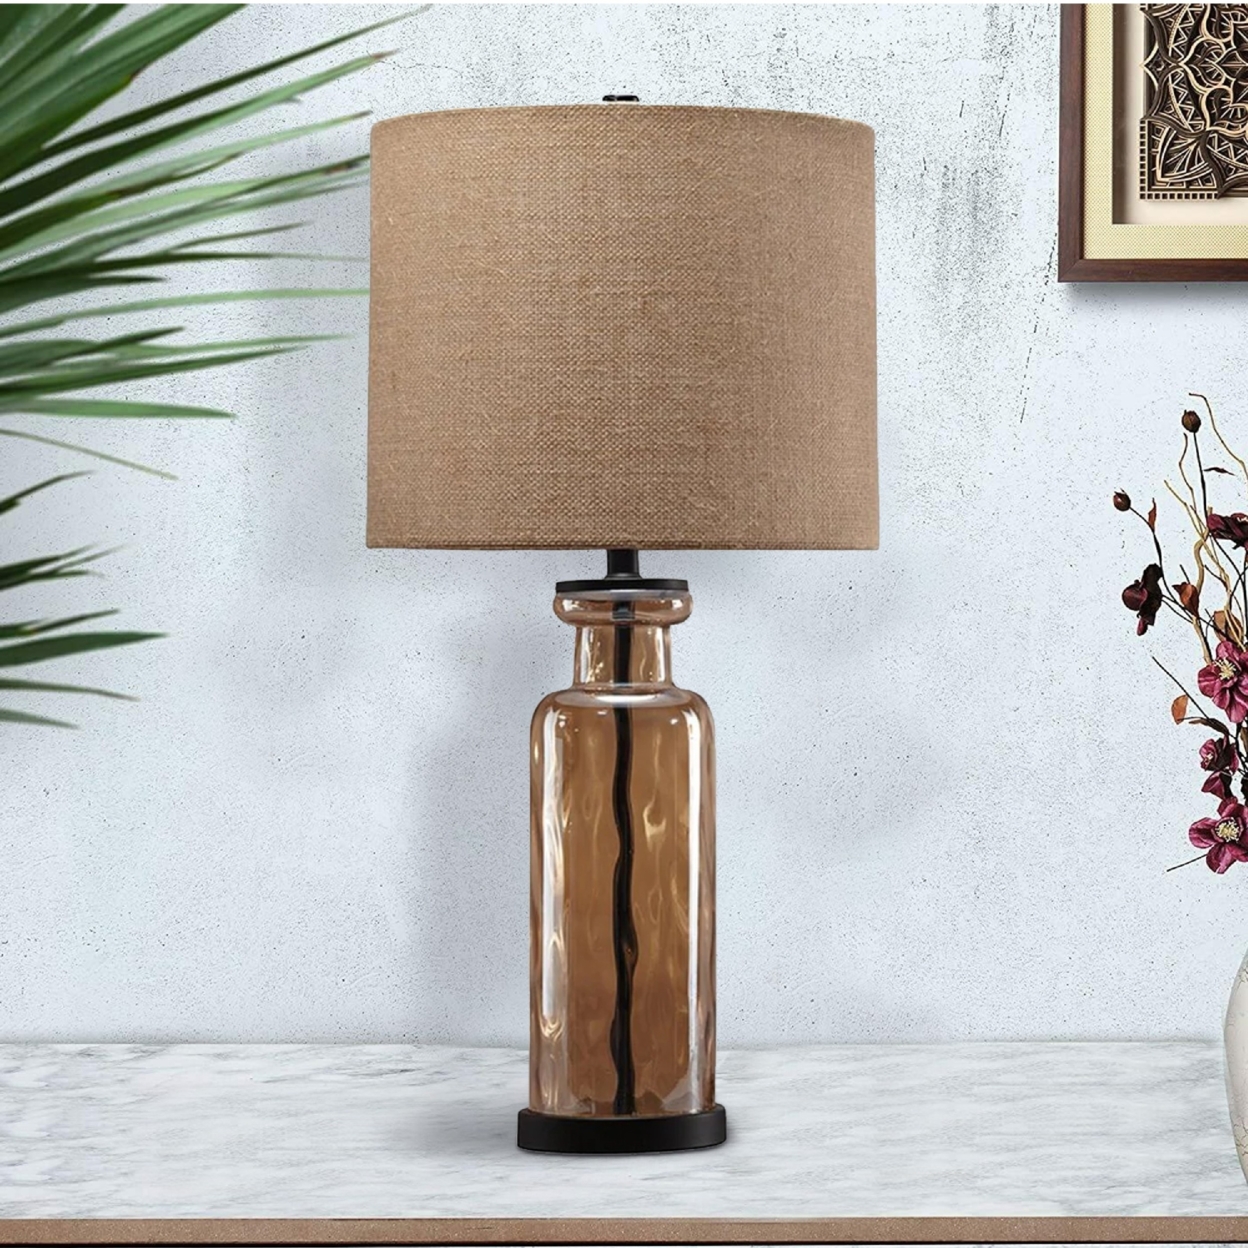 Glass Table Lamp With Fabric Drum Shade, Gold And Beige- Saltoro Sherpi